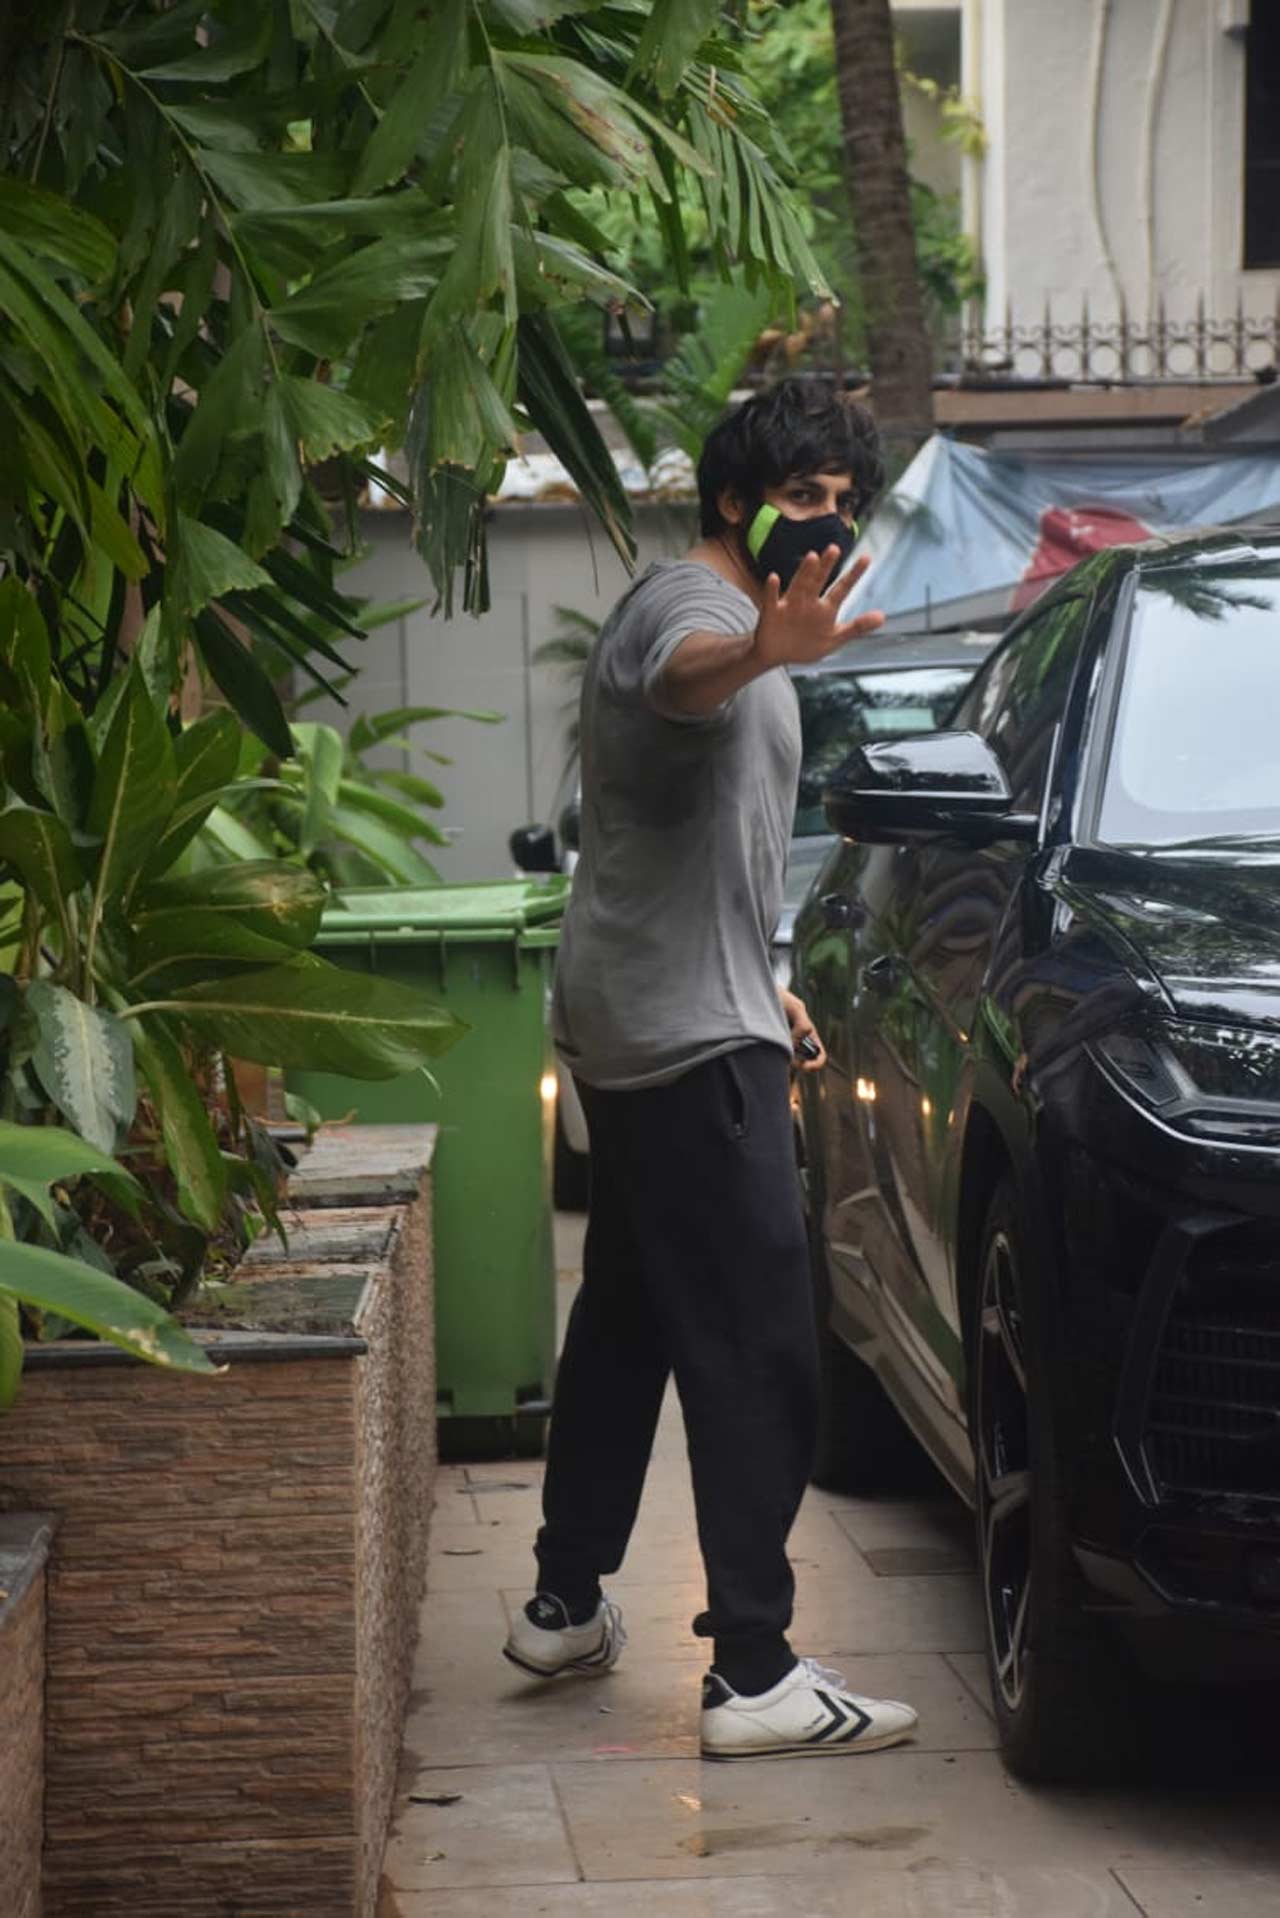 Kartik Aaryan waved at the paparazzi when spotted in Mumbai. Currently, the actor is using social media to amplify leads and generate funds for COVID patients. Kartik has also been urging everyone to help the needy while making generous contributions himself.